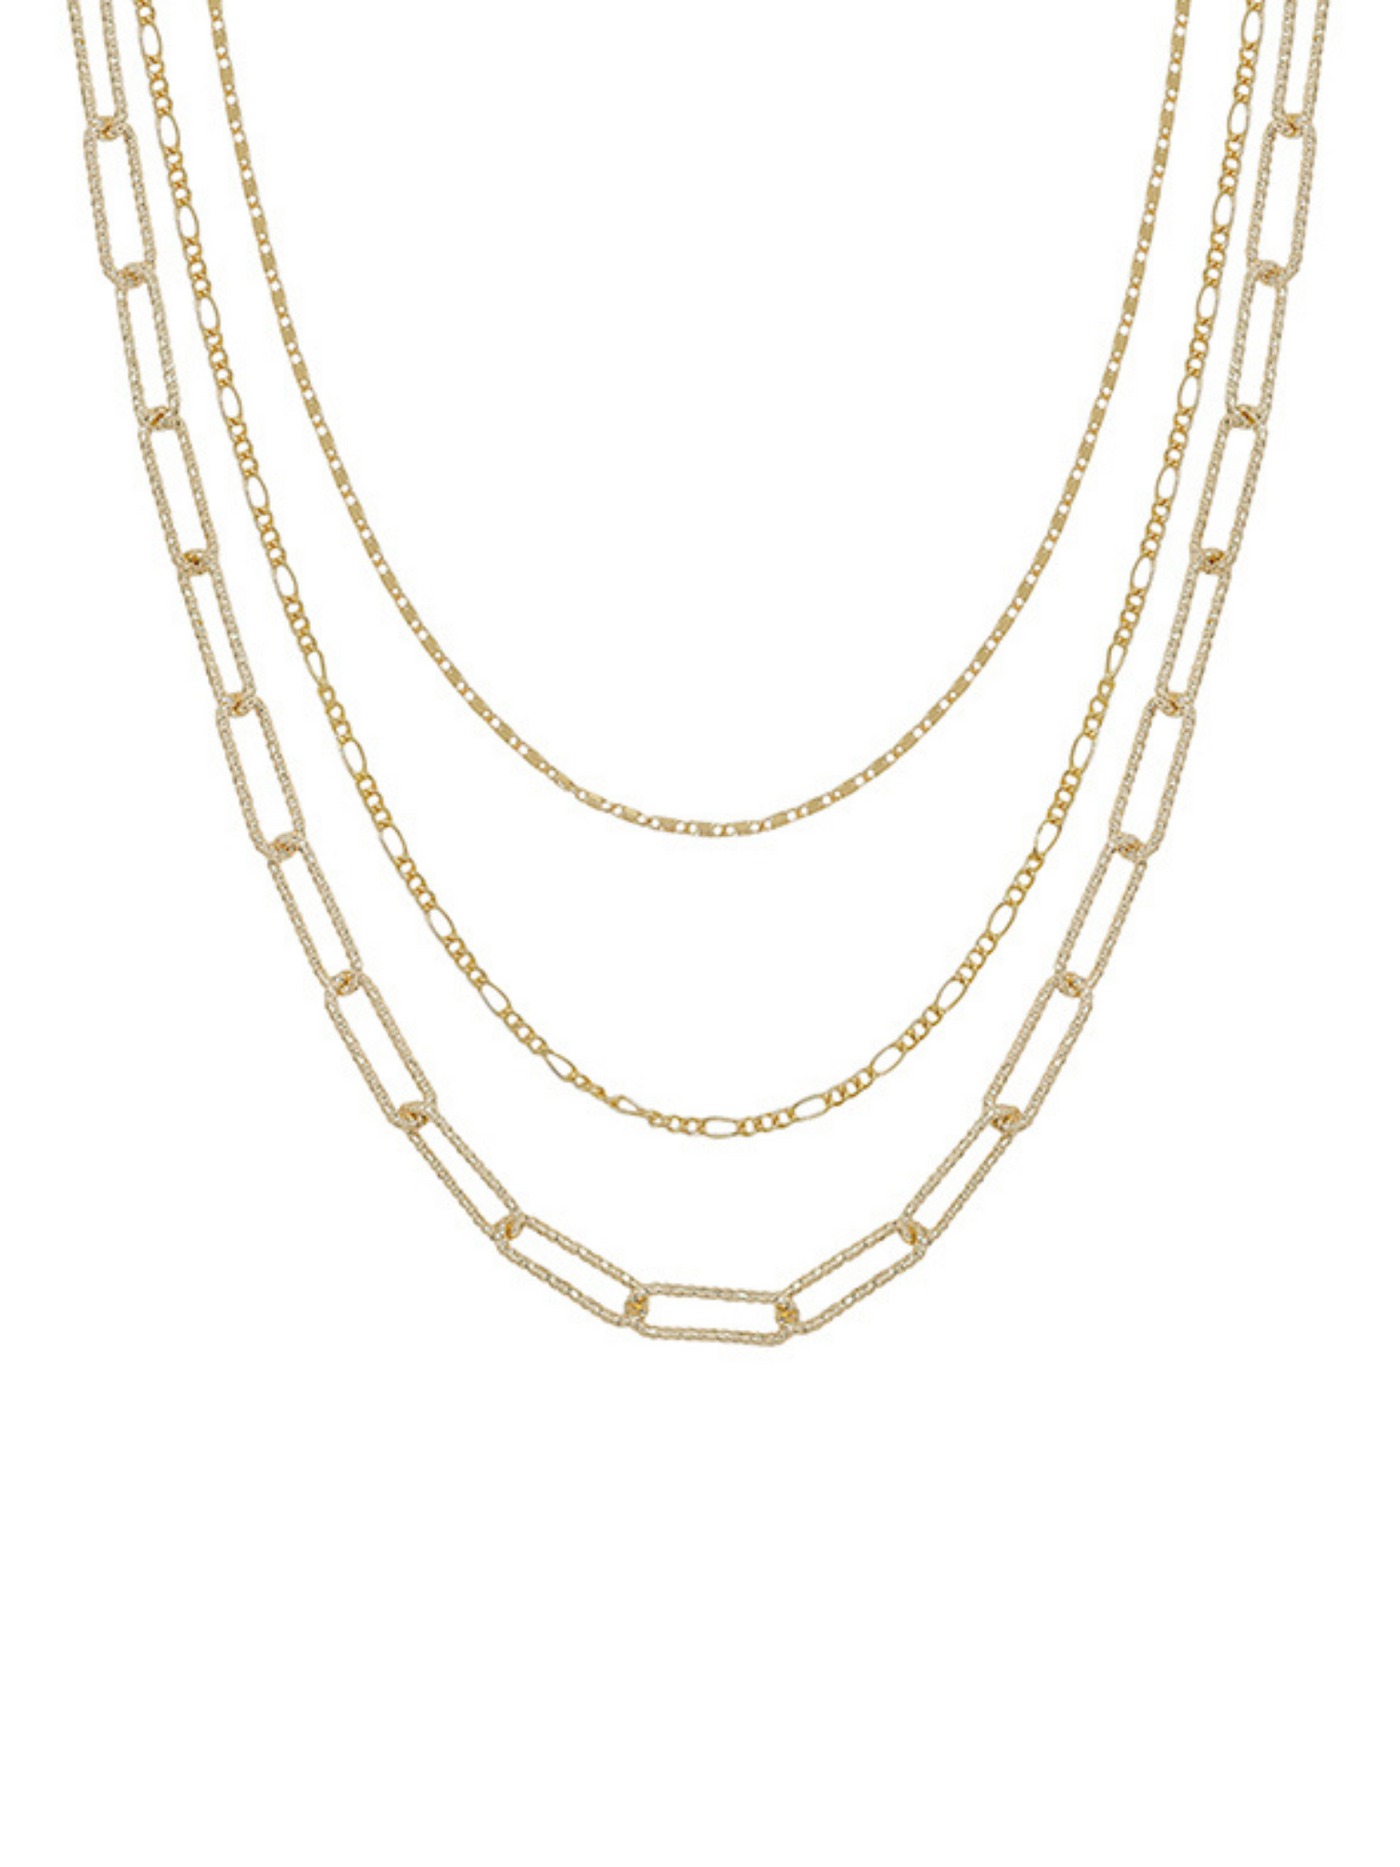 Multi Chain 3 Layered Short Necklace